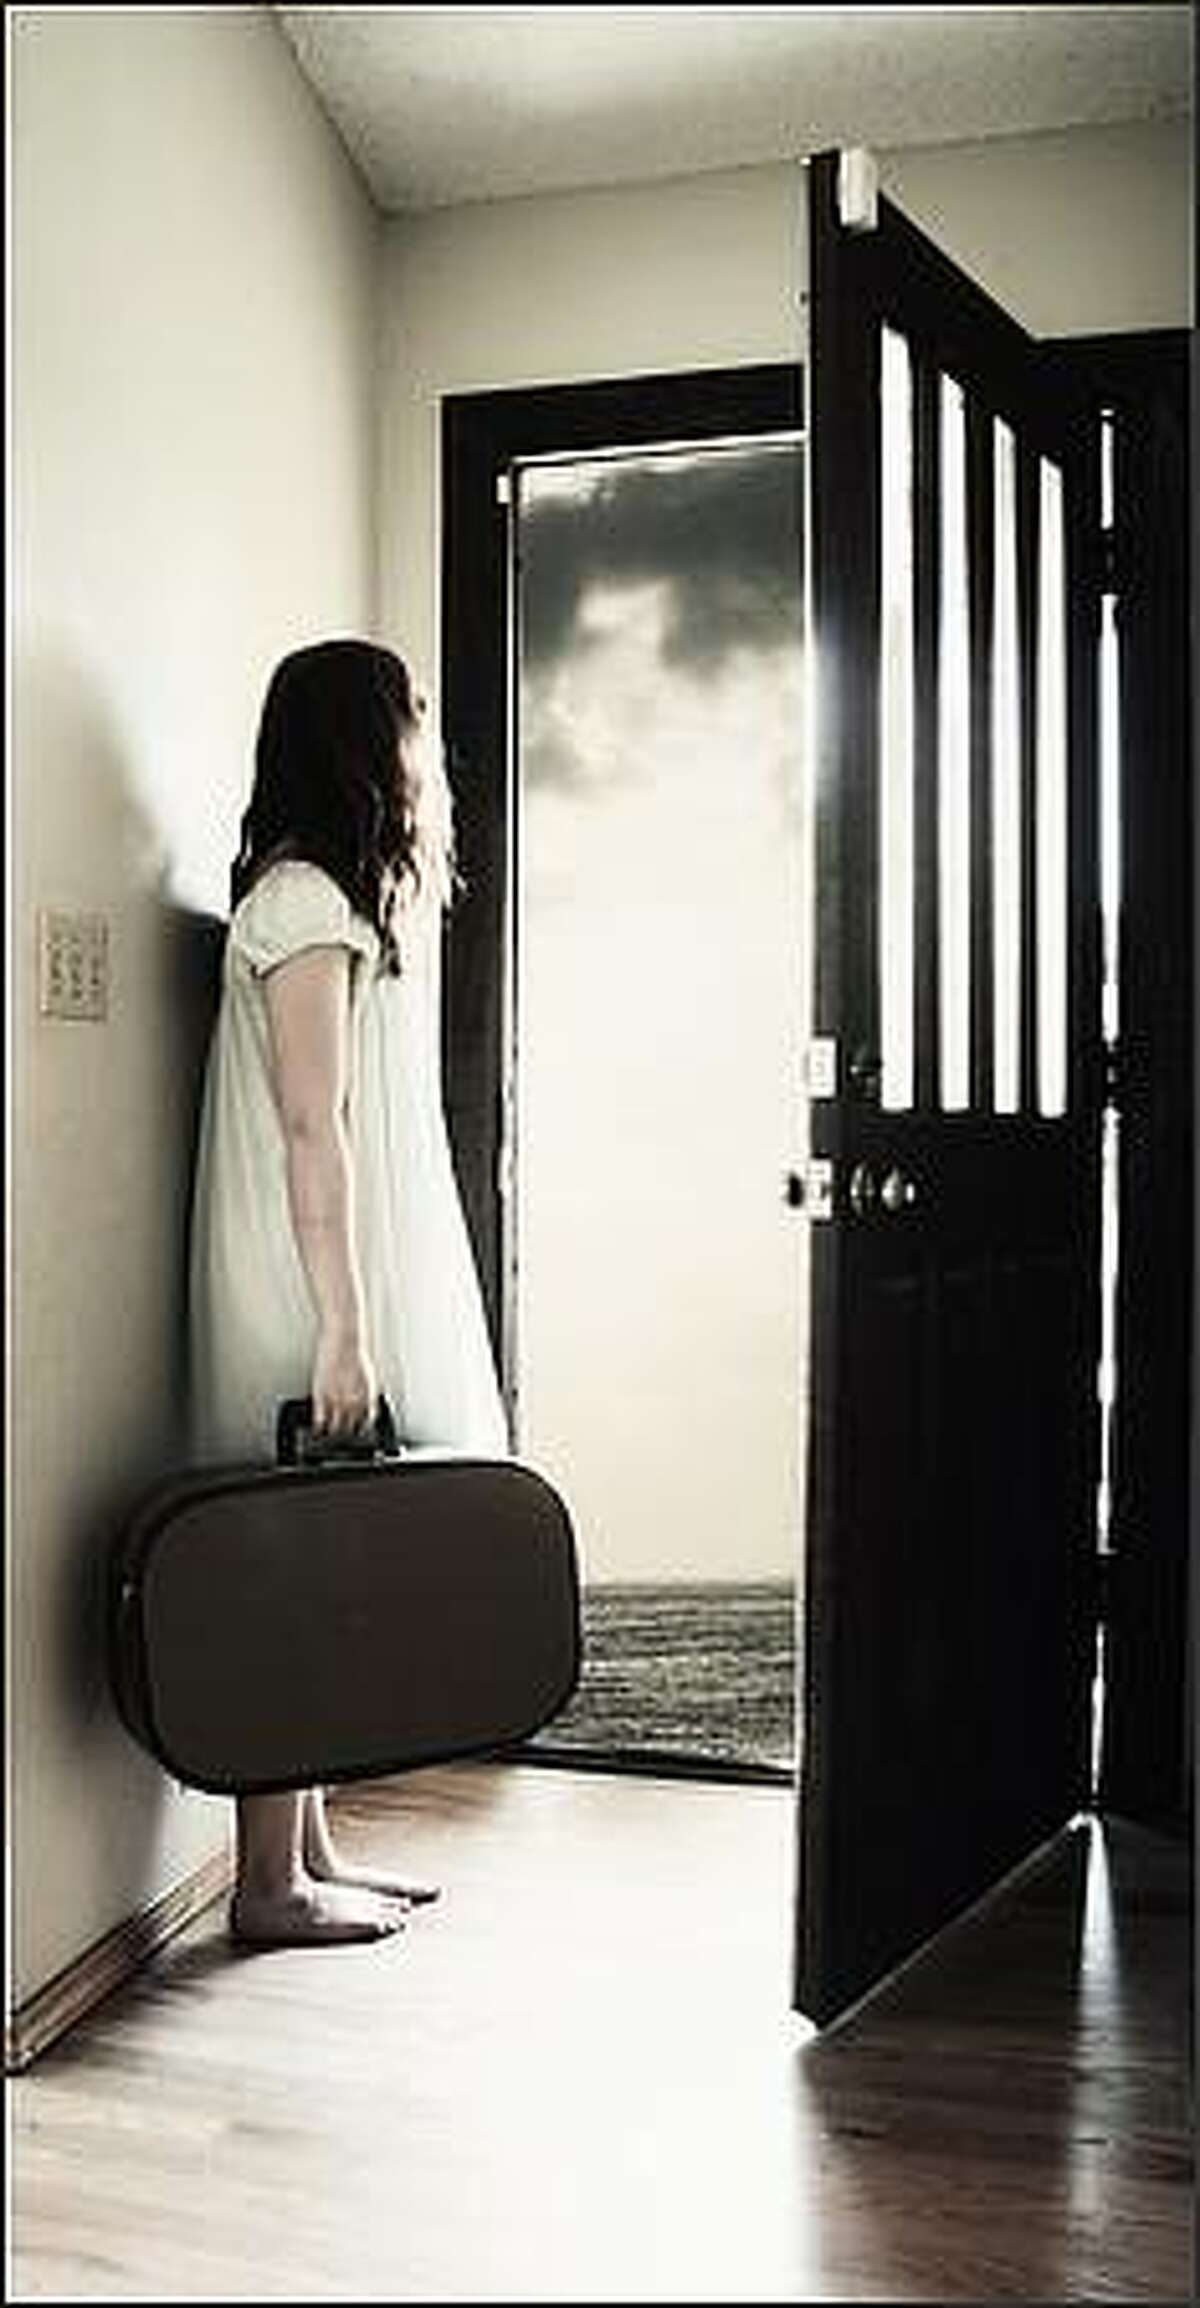 Closed doors Opportunity Awaits, by Chrissie White